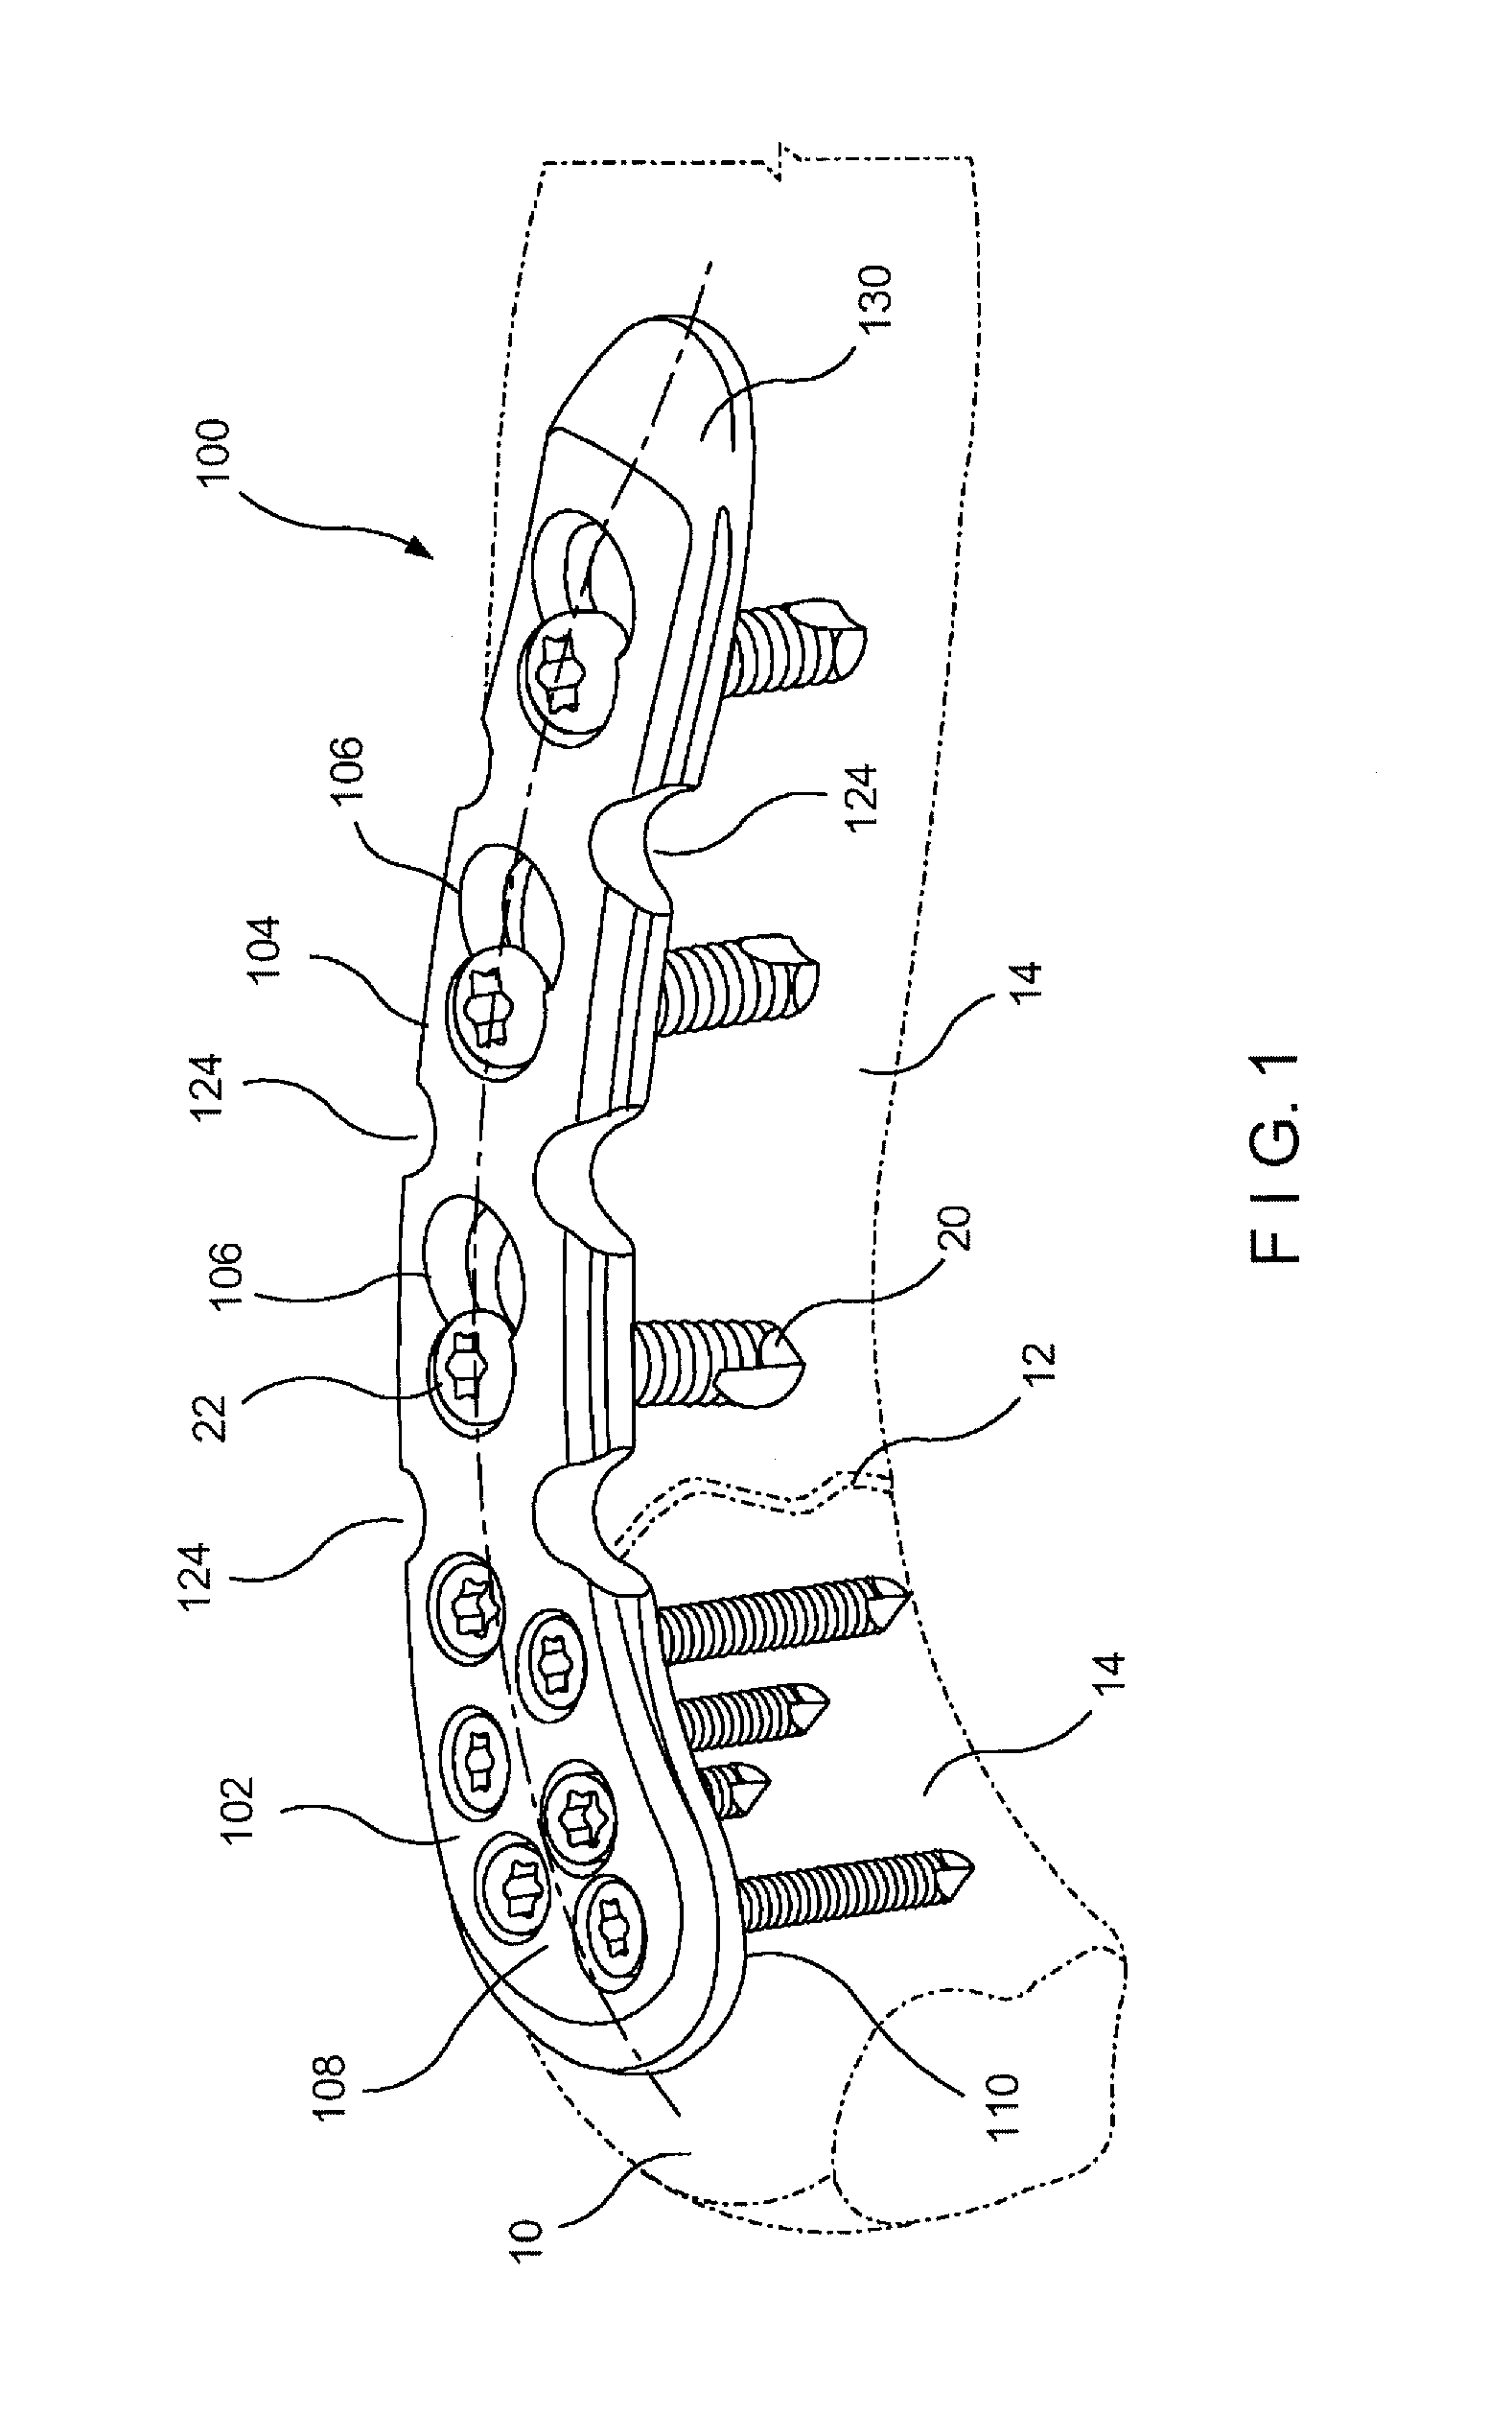 System and method for minimally invasive clavicle plate application